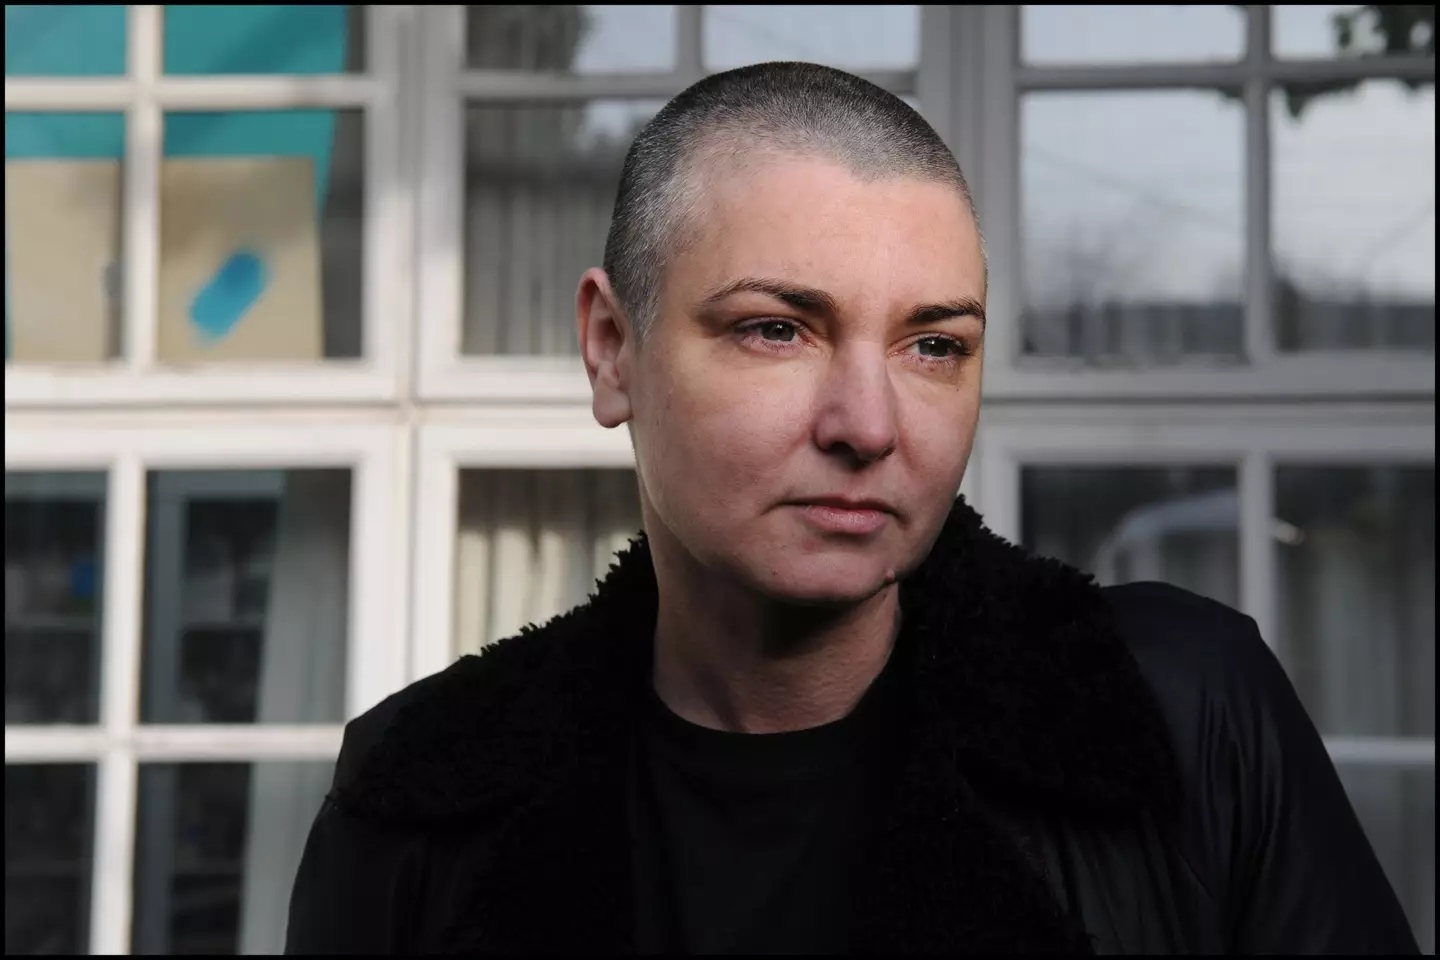 Sinéad O'Connor passed away aged 56.